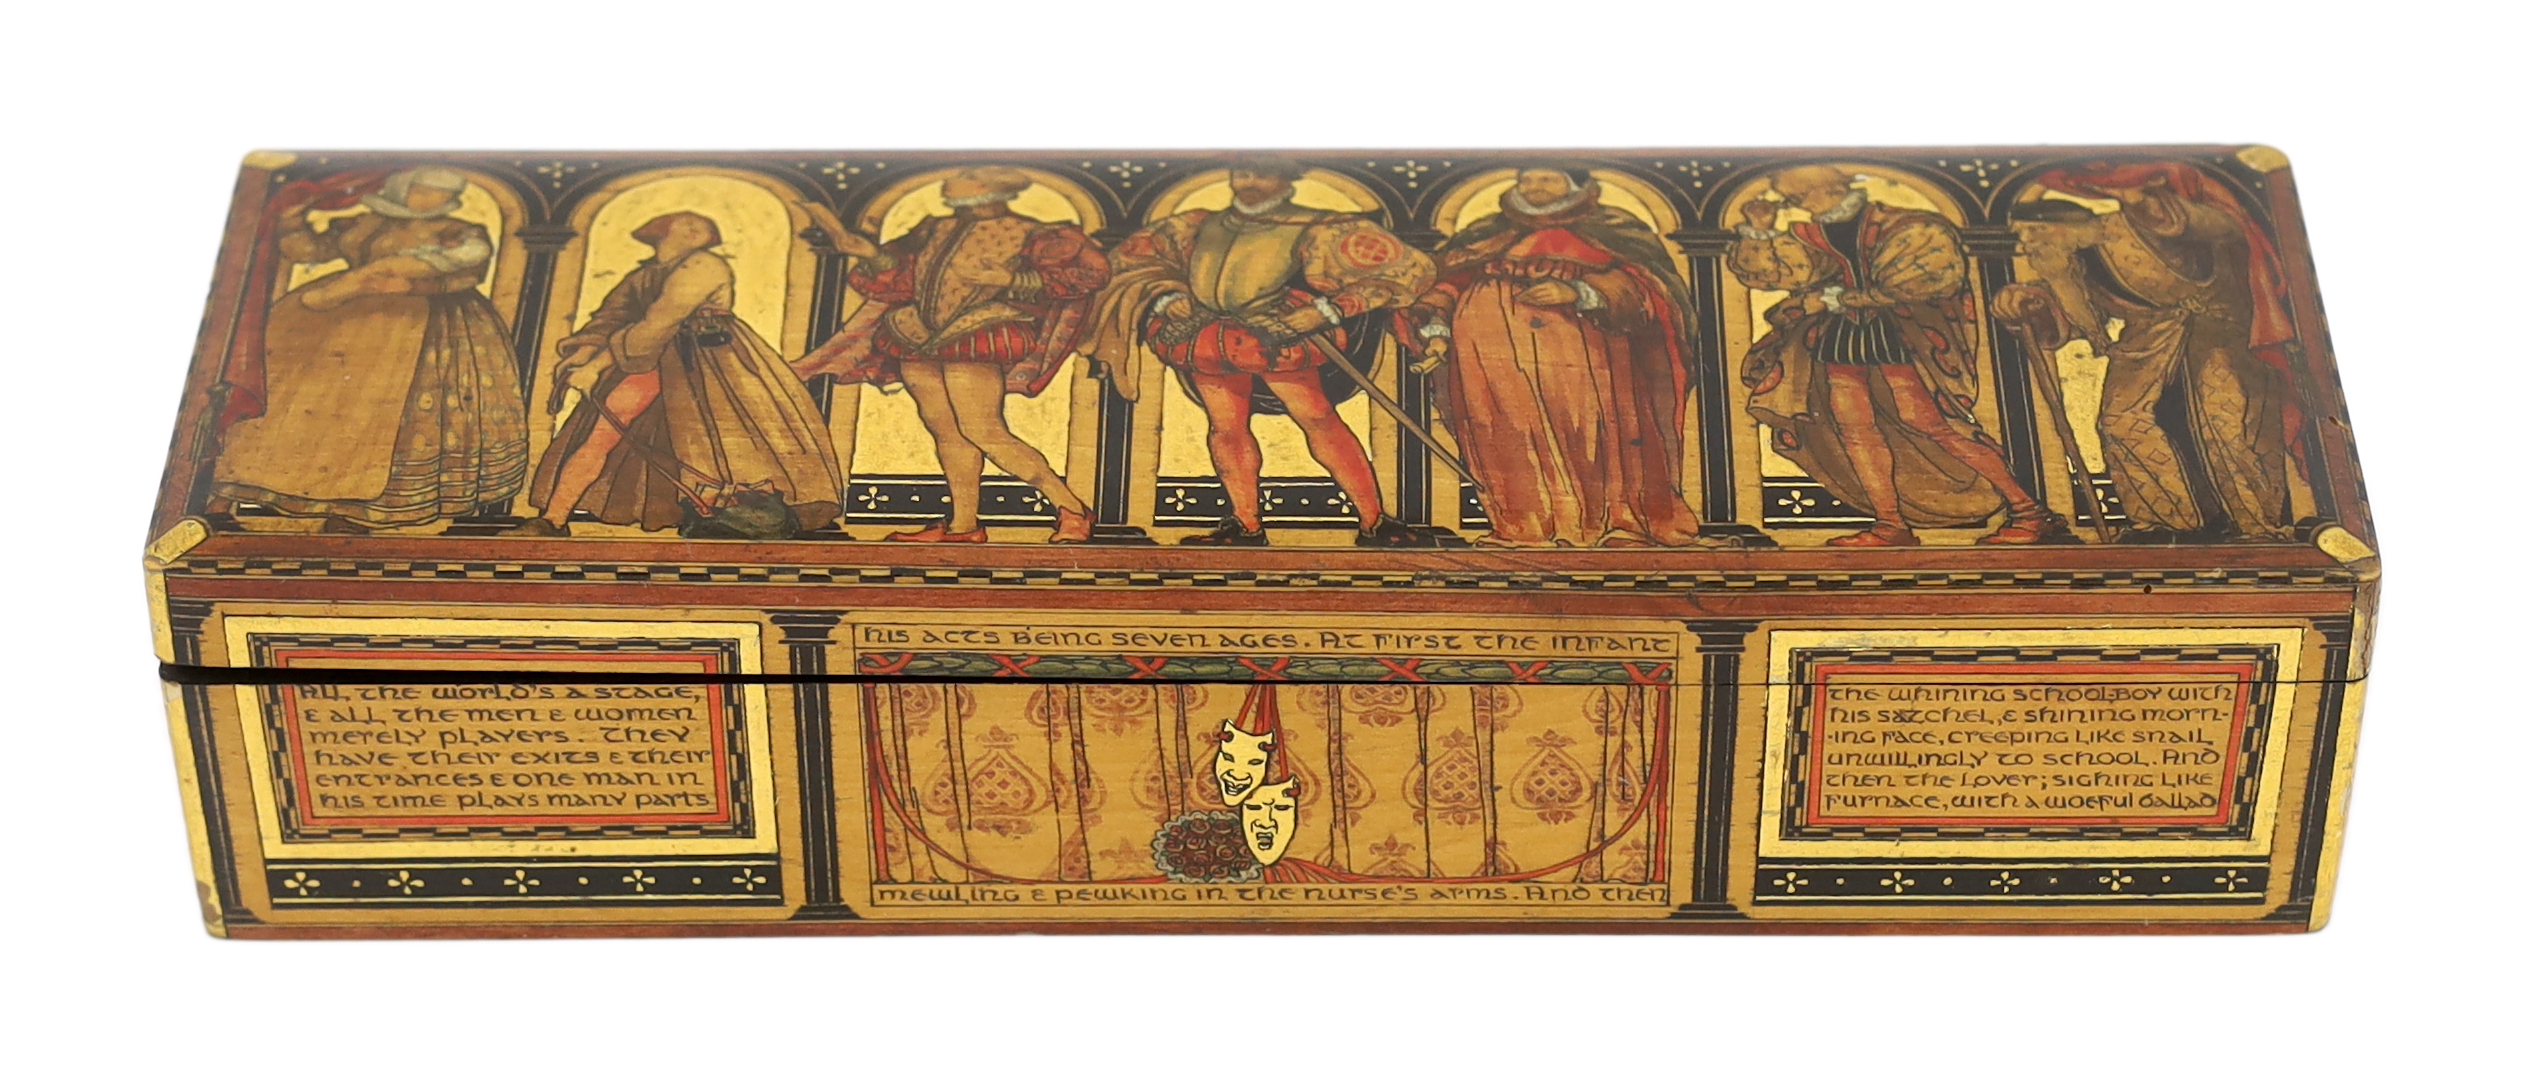 Gwendolen Beatrice White (British, 1904-1981), The Seven Ages of Man Casket, whitewood with stained and gilt gesso decoration, 32.5 x 11 x 7.5cm